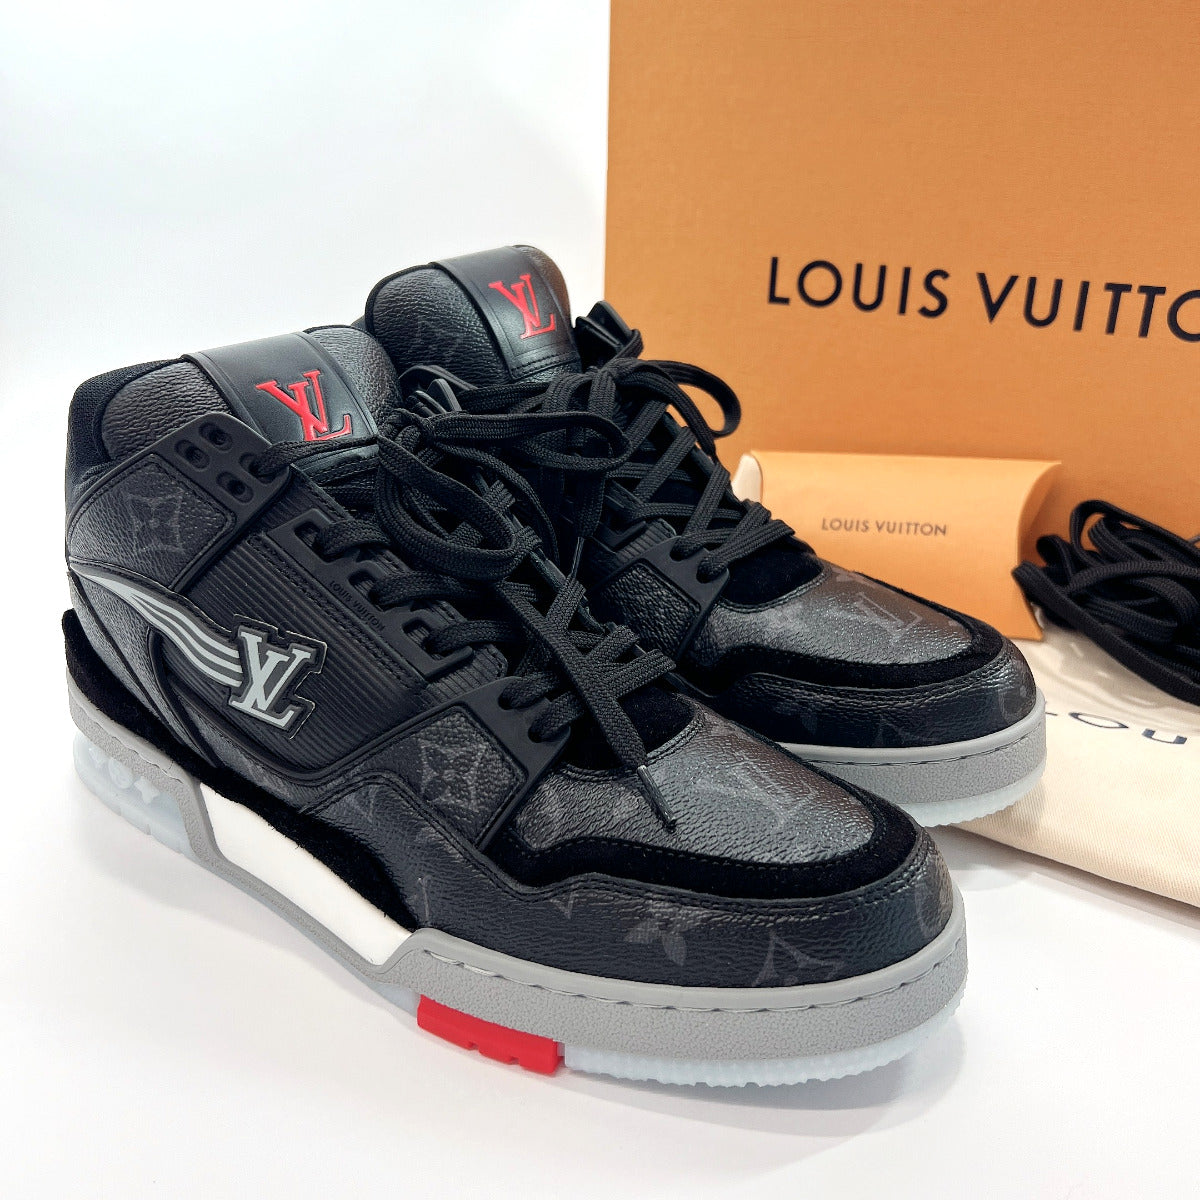 LOUIS VUITTON sneakers 1A8AAA LV trainer line sneakers leather/rubber ...